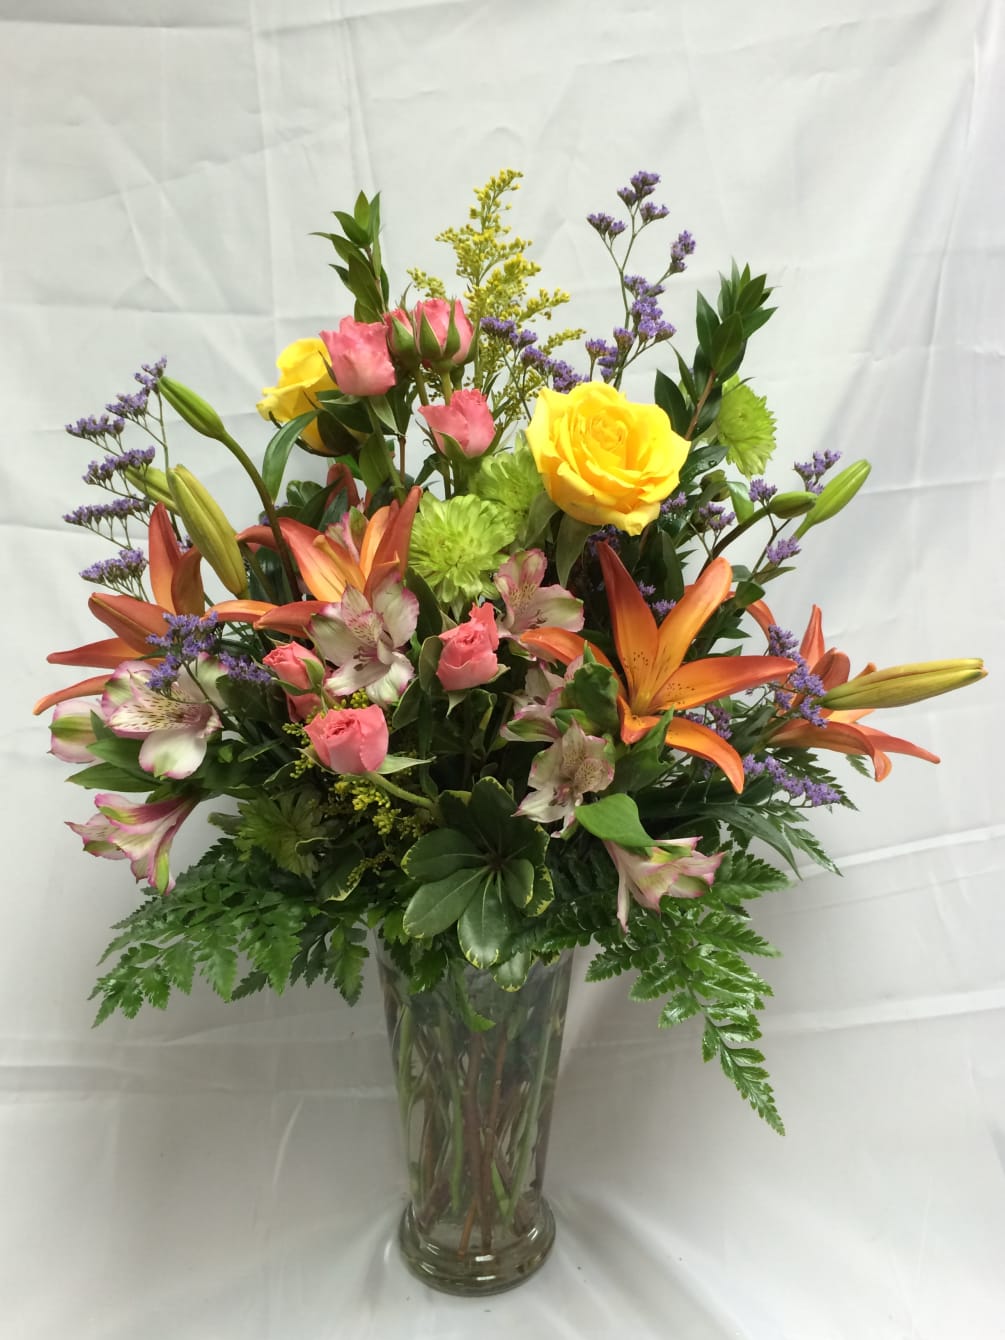 This is a large mixture of spring flowers designed in a clear